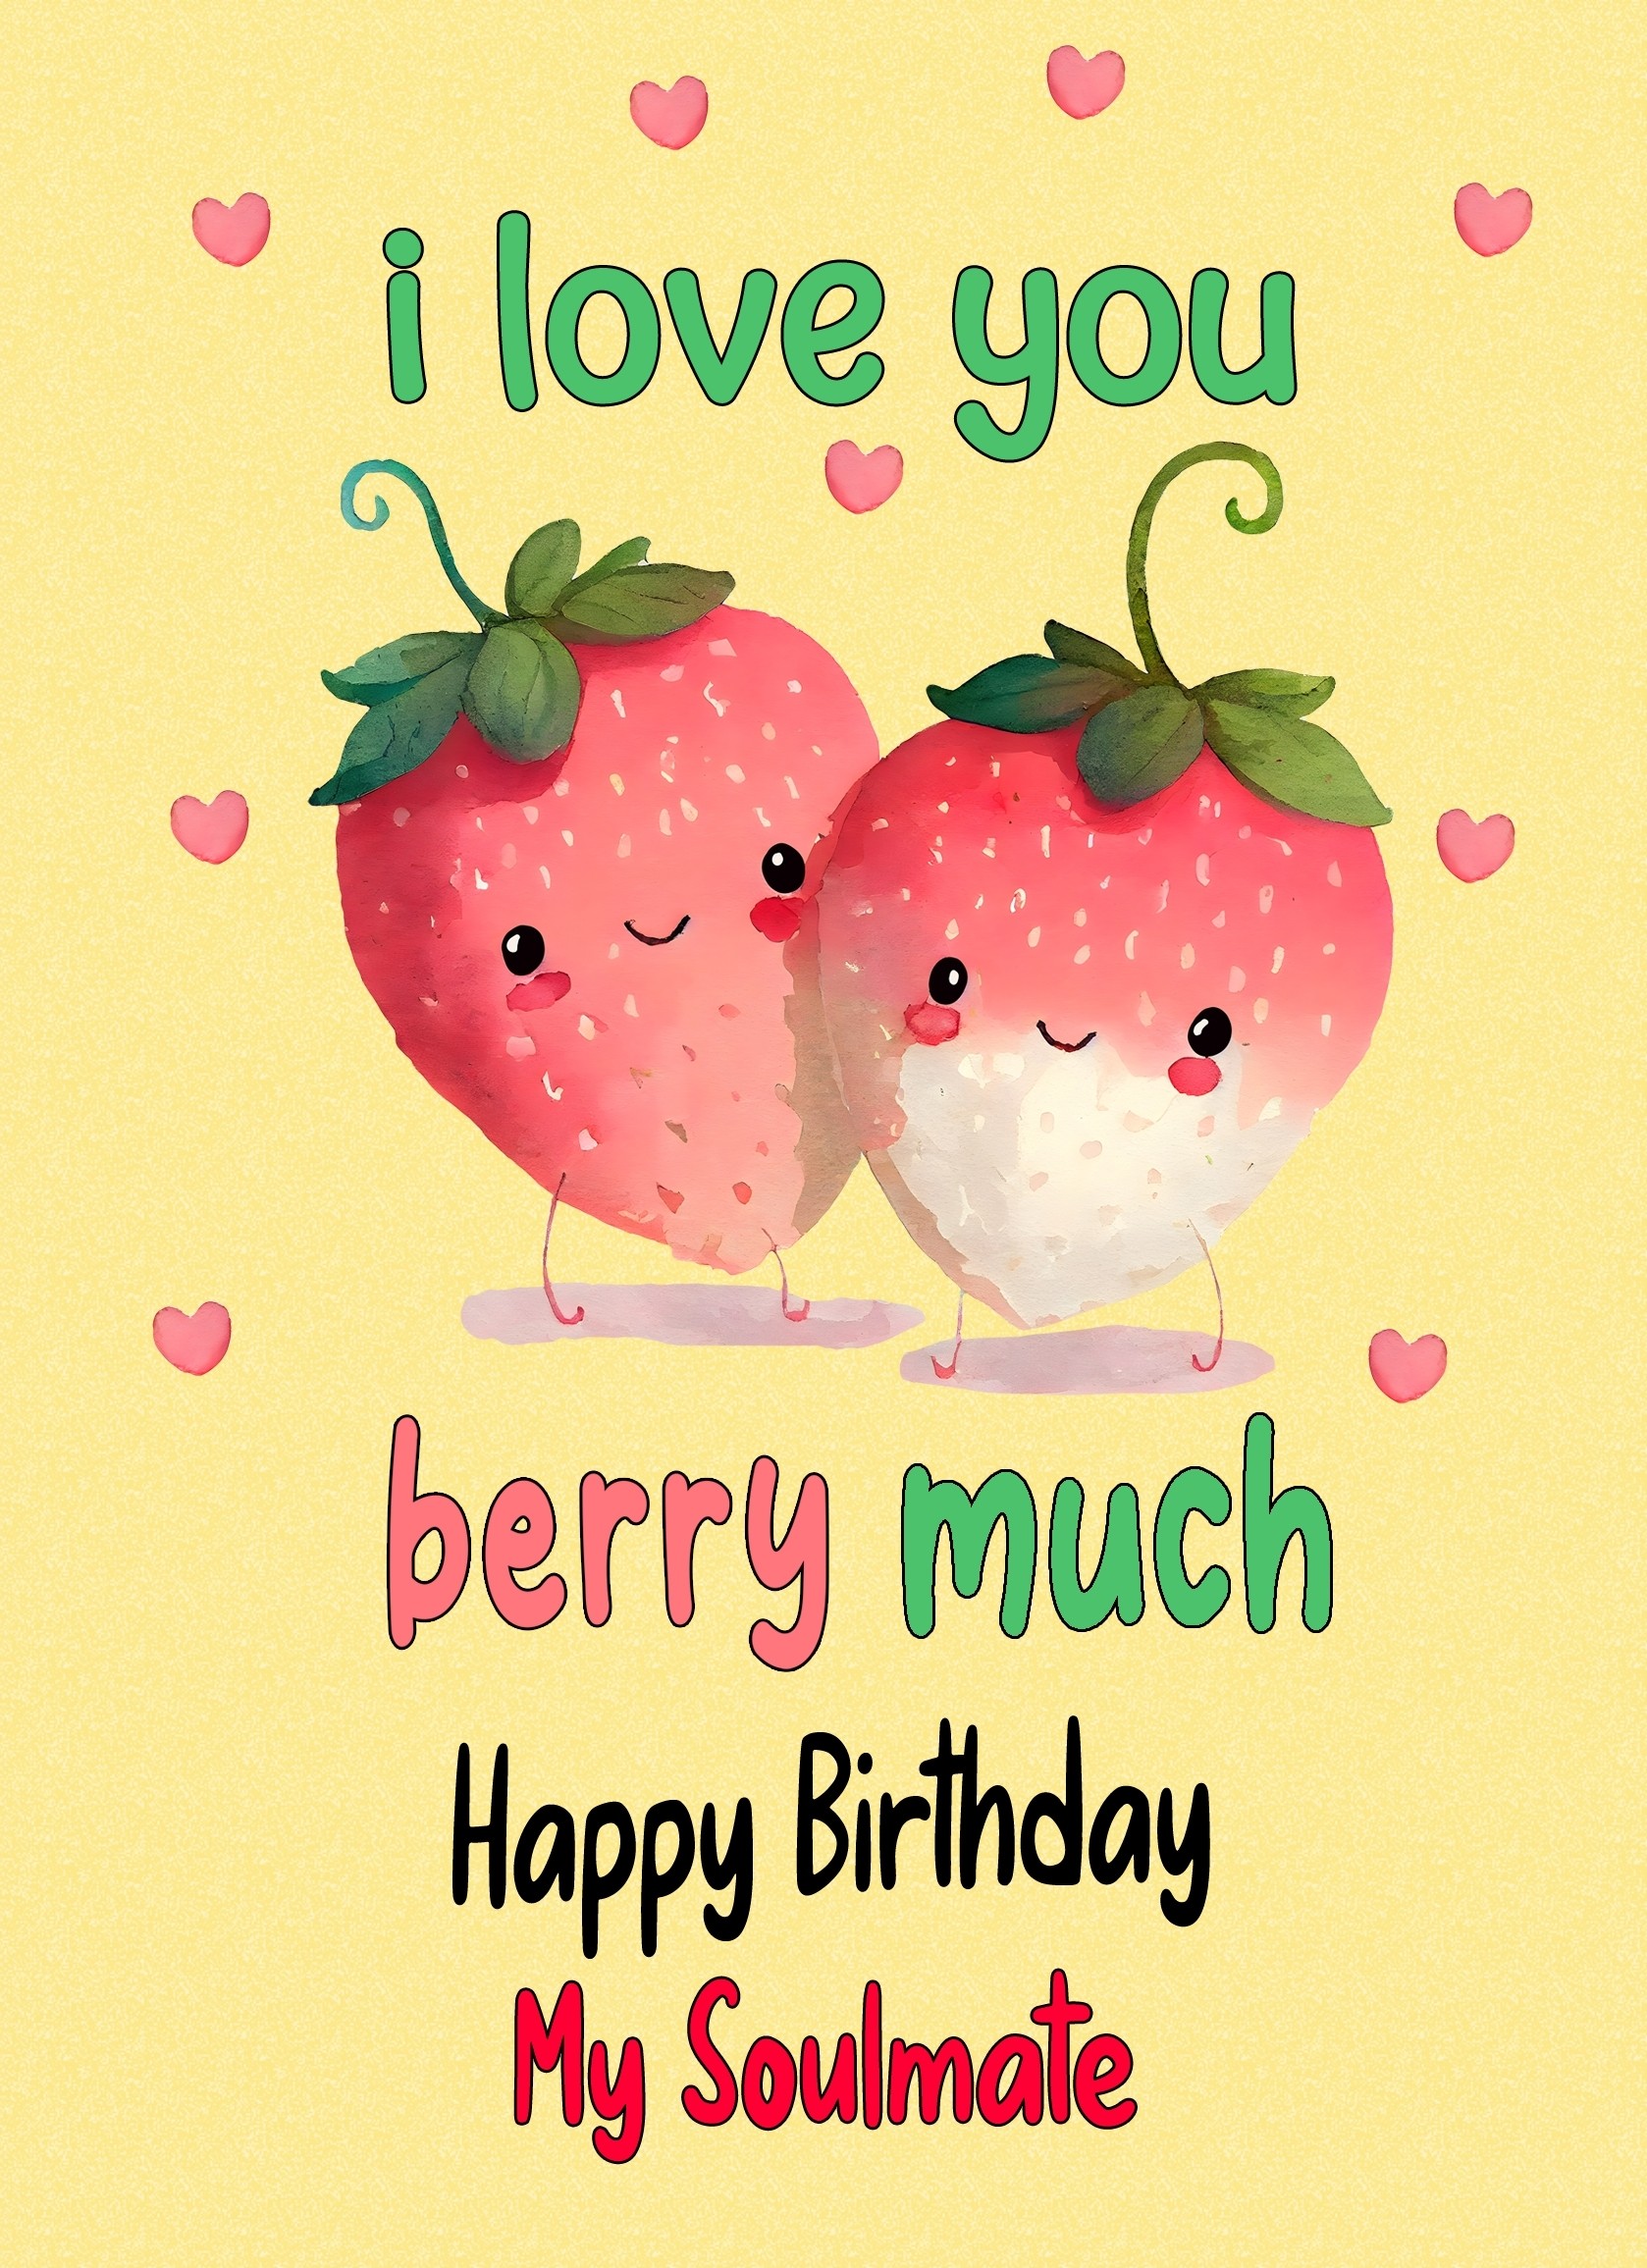 Funny Pun Romantic Birthday Card for Soulmate (Berry Much)